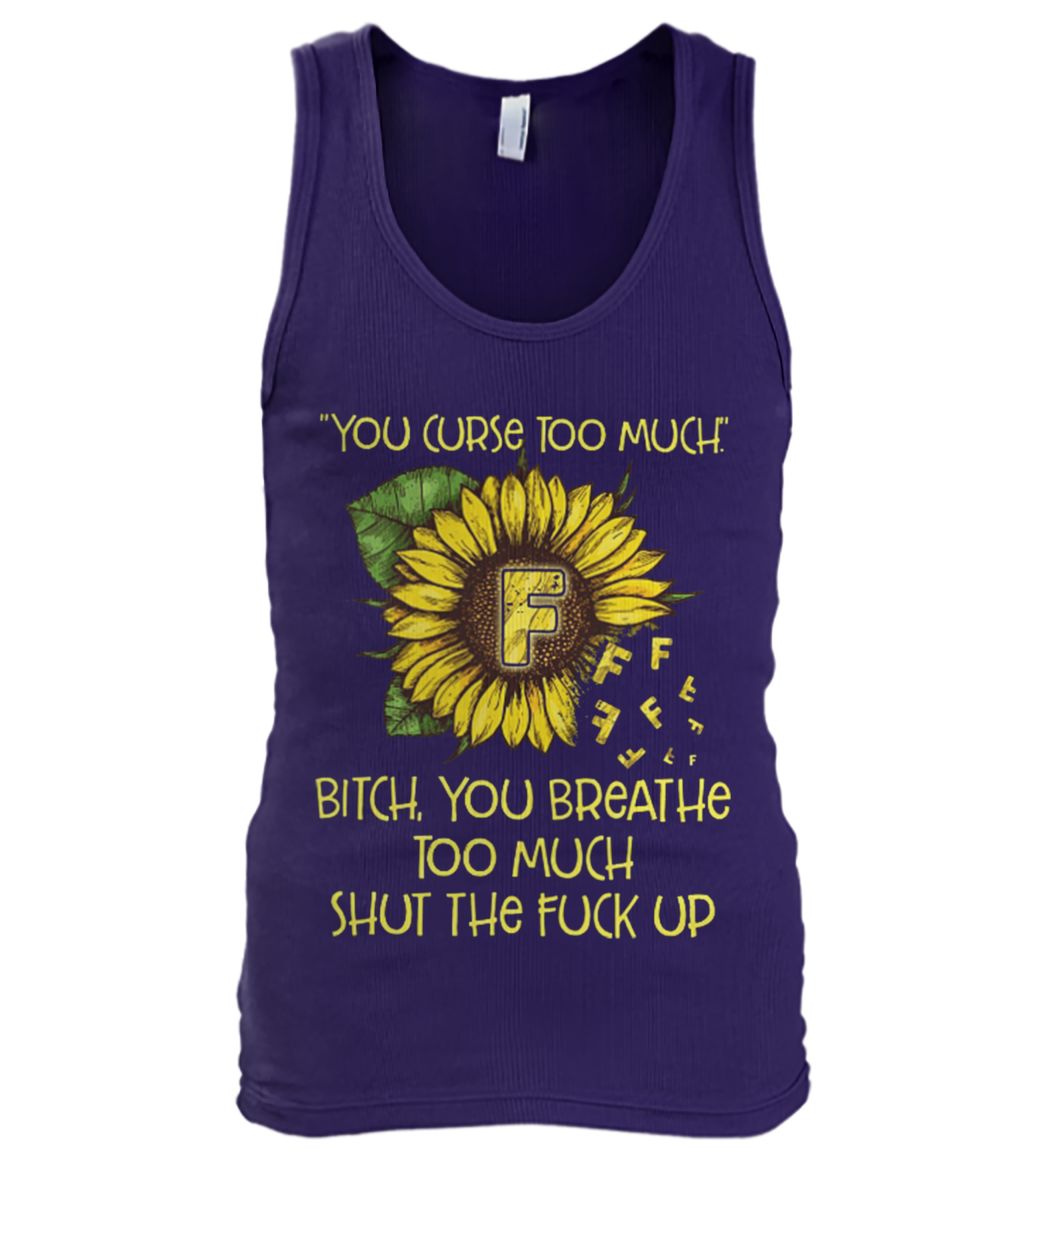 Sunflower you curse too much bitch you breathe too much shut the fuck up men's tank top